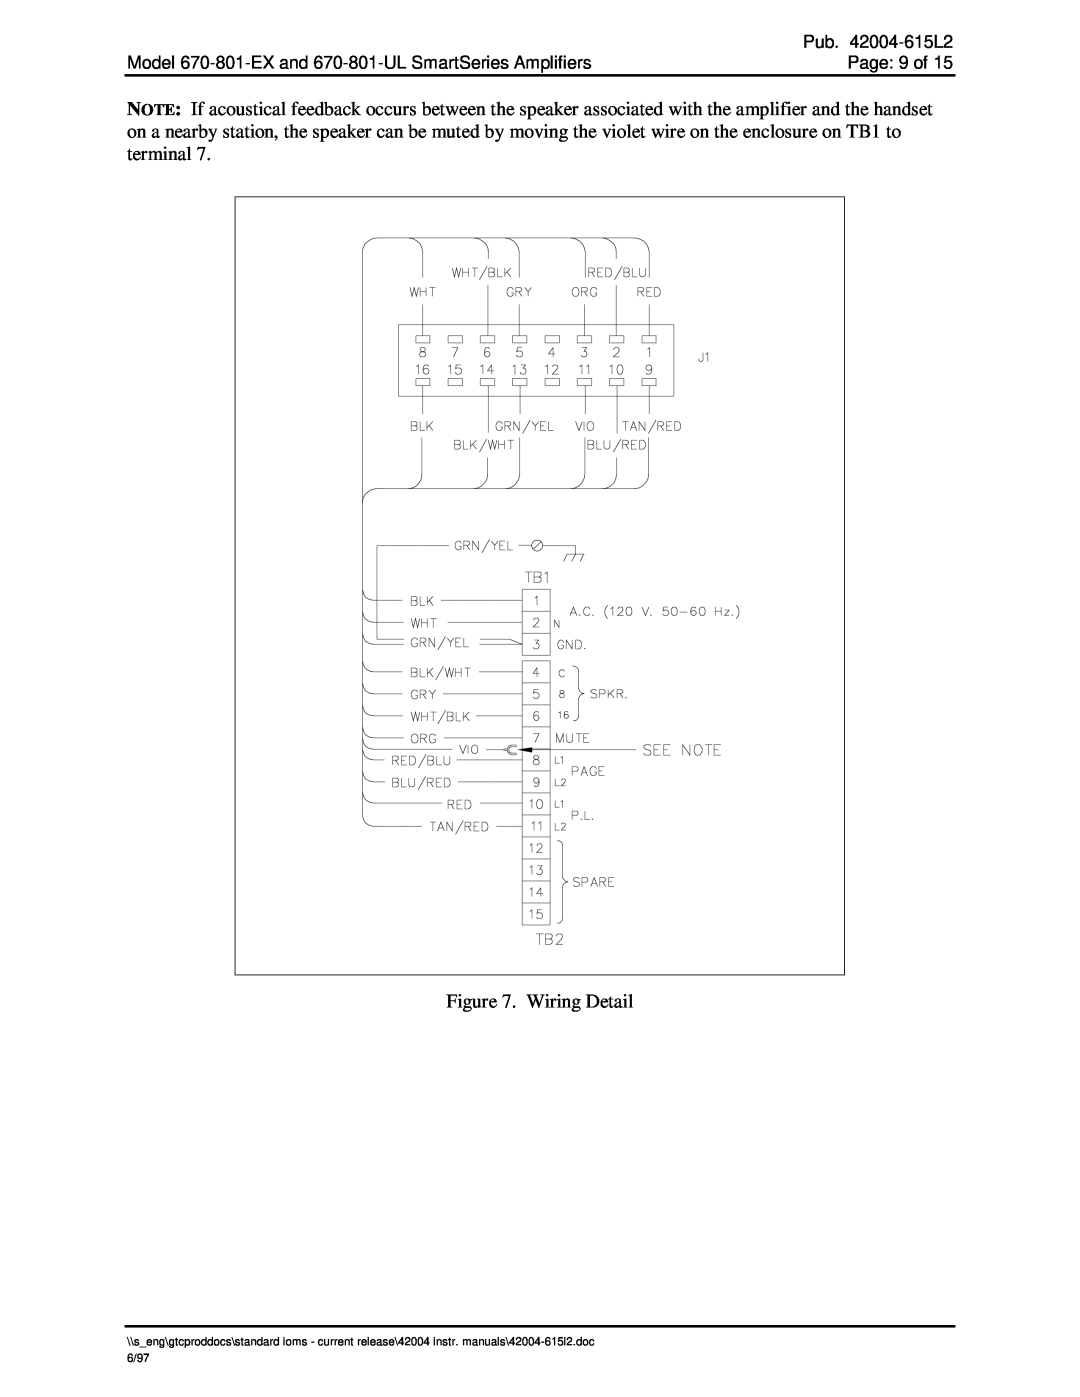 Hubbell 670-801-UL, 670-801-EX manual Wiring Detail, 42004-615L2, Page 9 of 